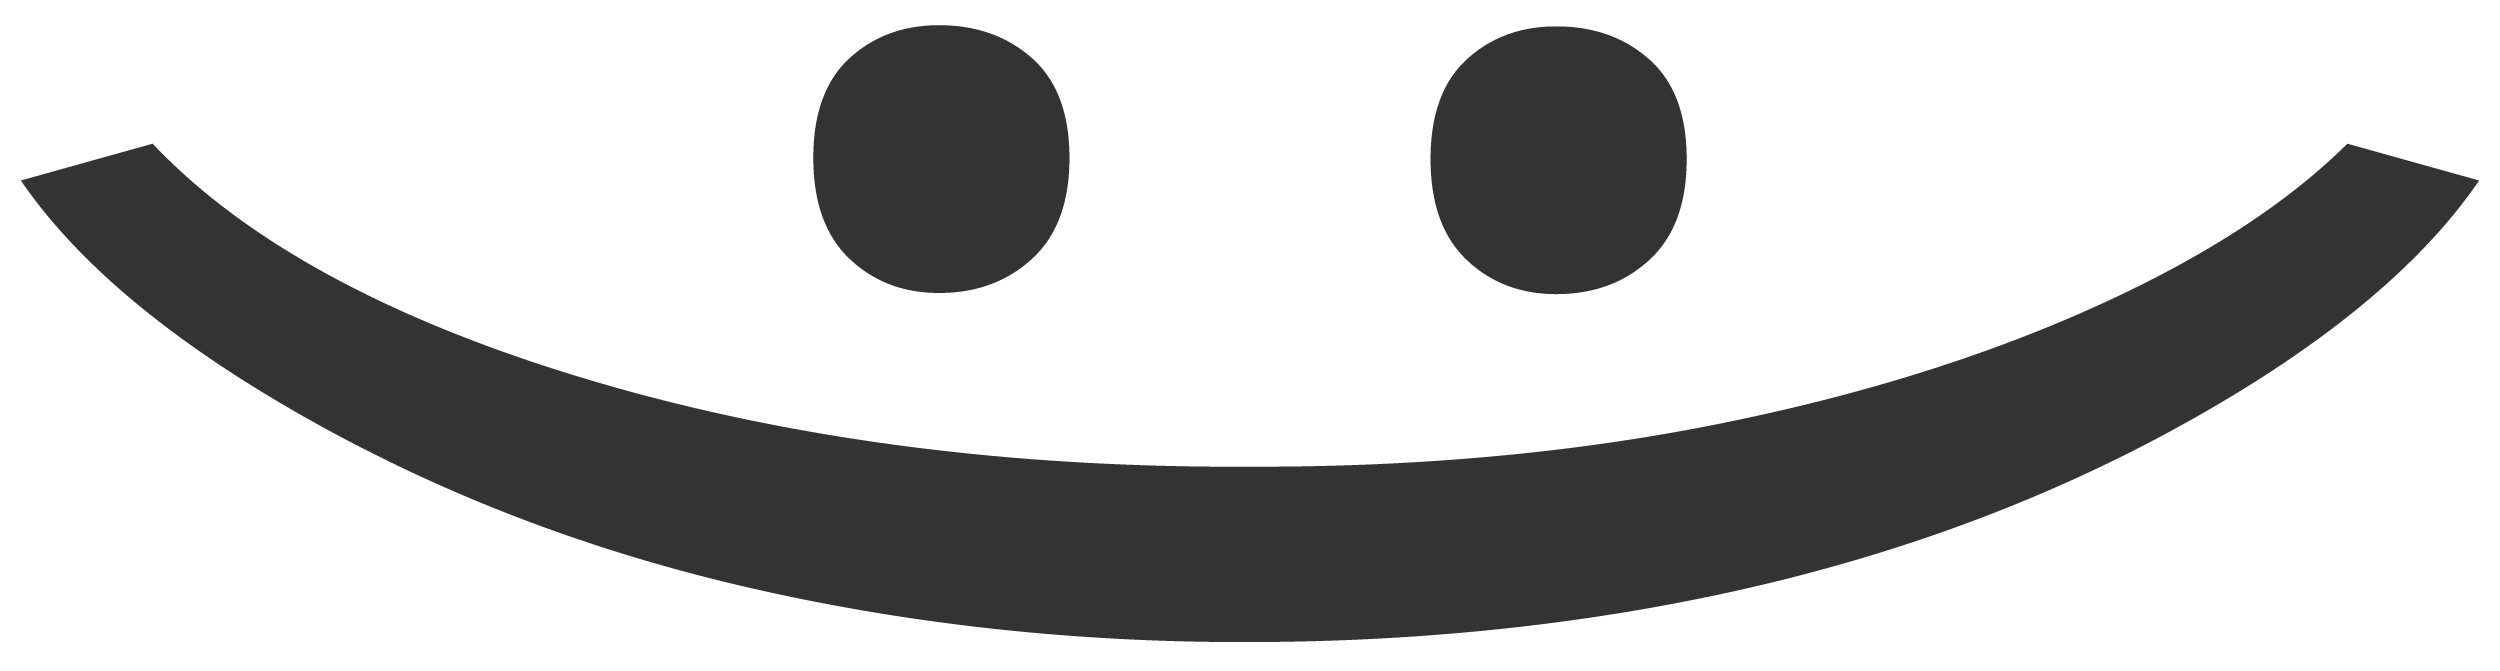 image of DARB: an emoticon smiley face made of a colon and a single parenthesis, flipped upright so the smile extends laterally and the eyes are above it